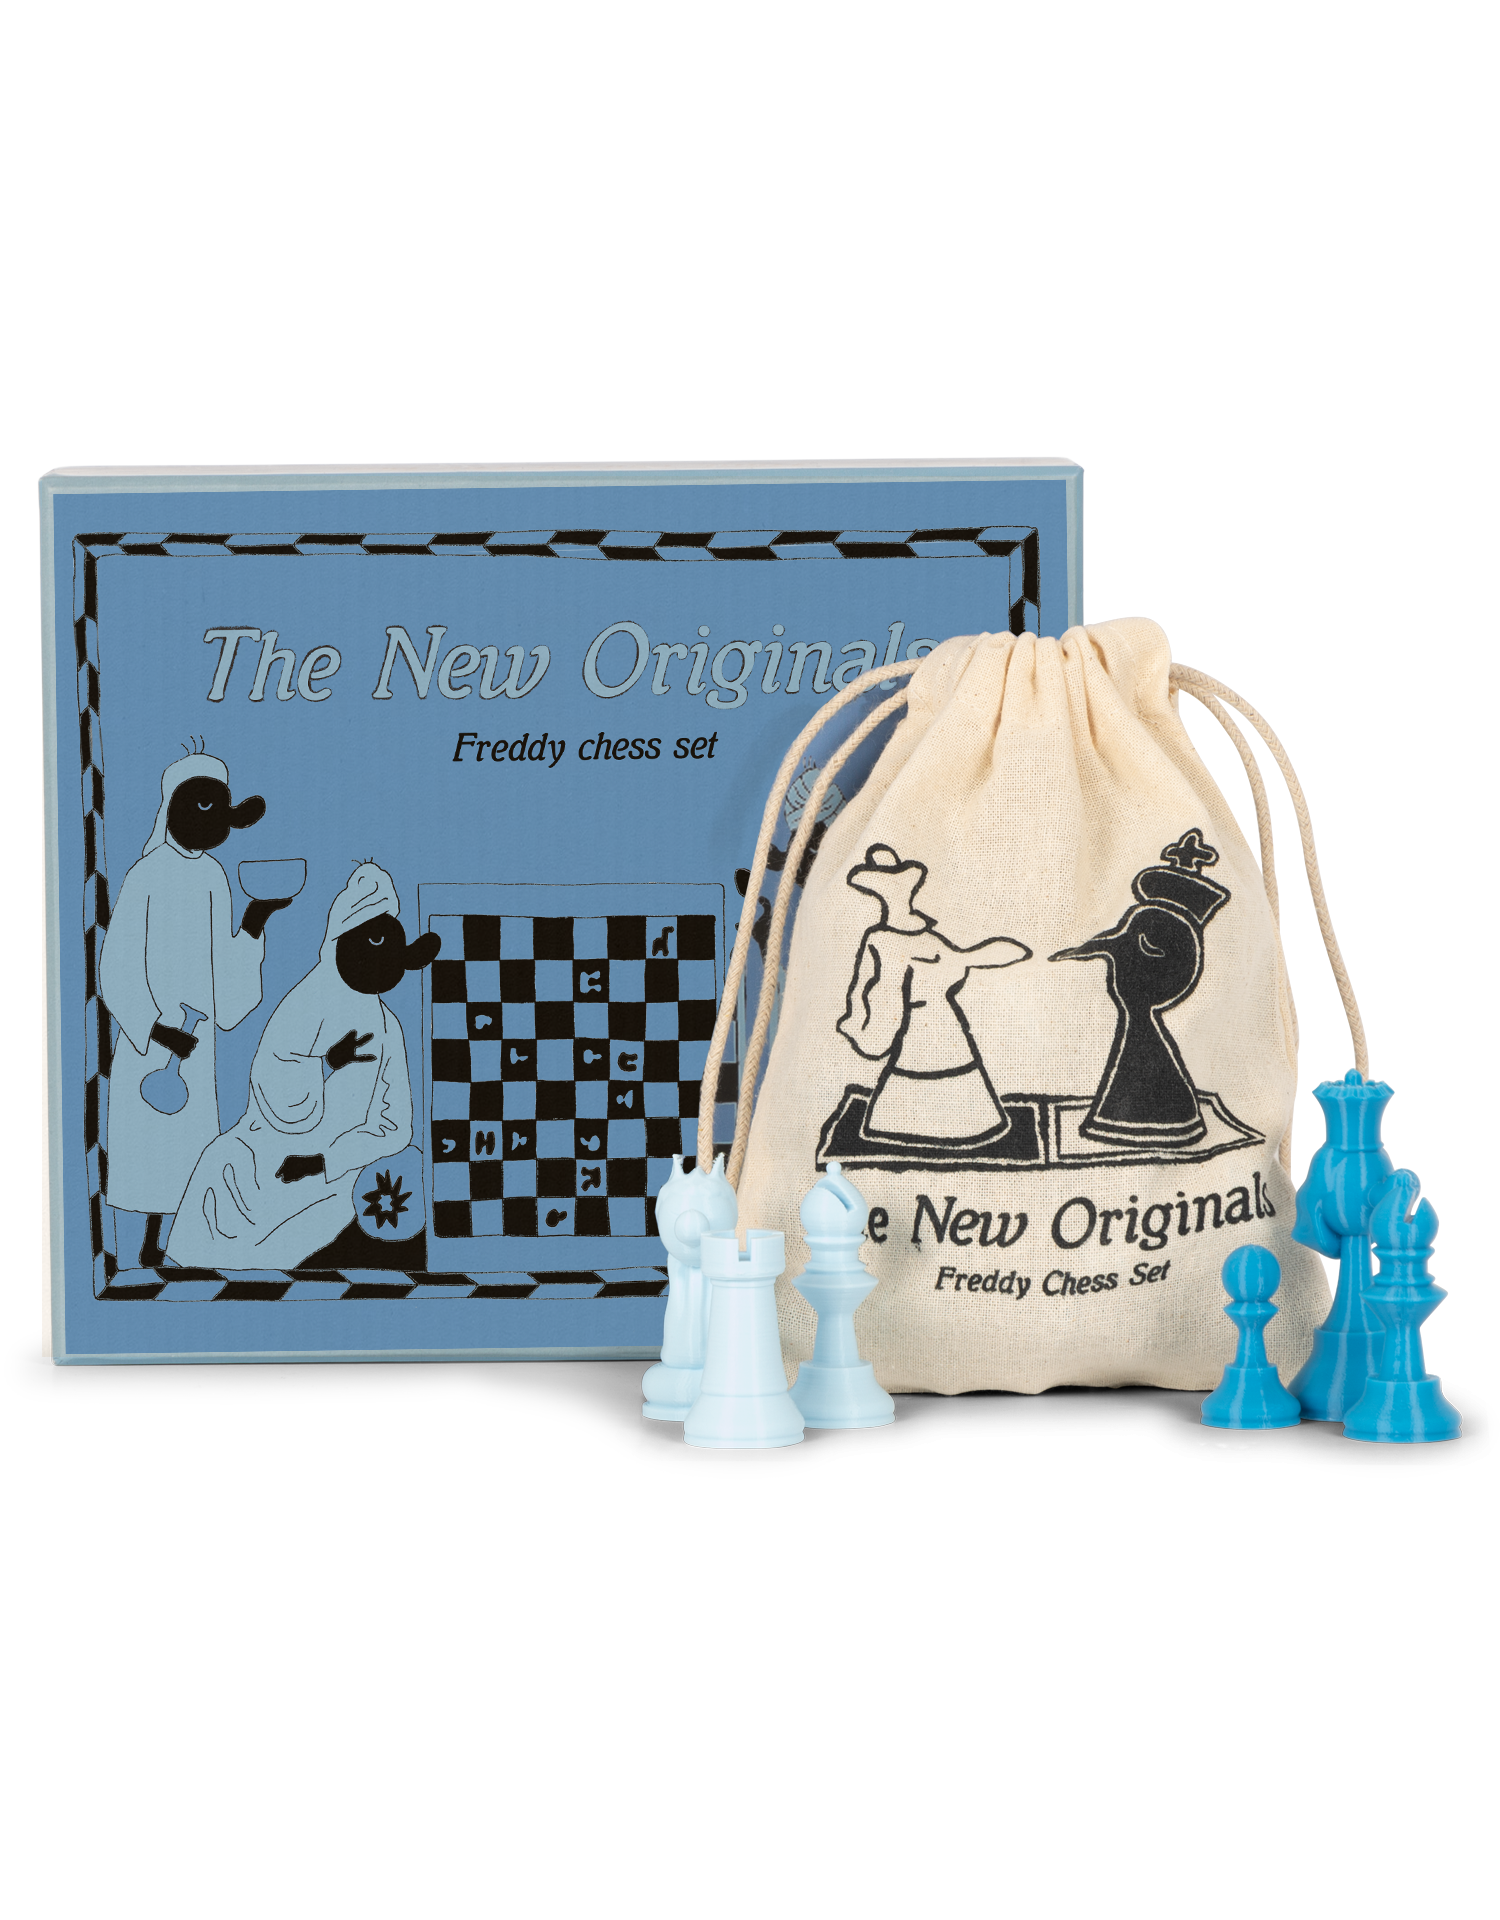 3D Printed Chess Set_The New Originals_Space Junk co_Alan Nguyen_productshot1.png